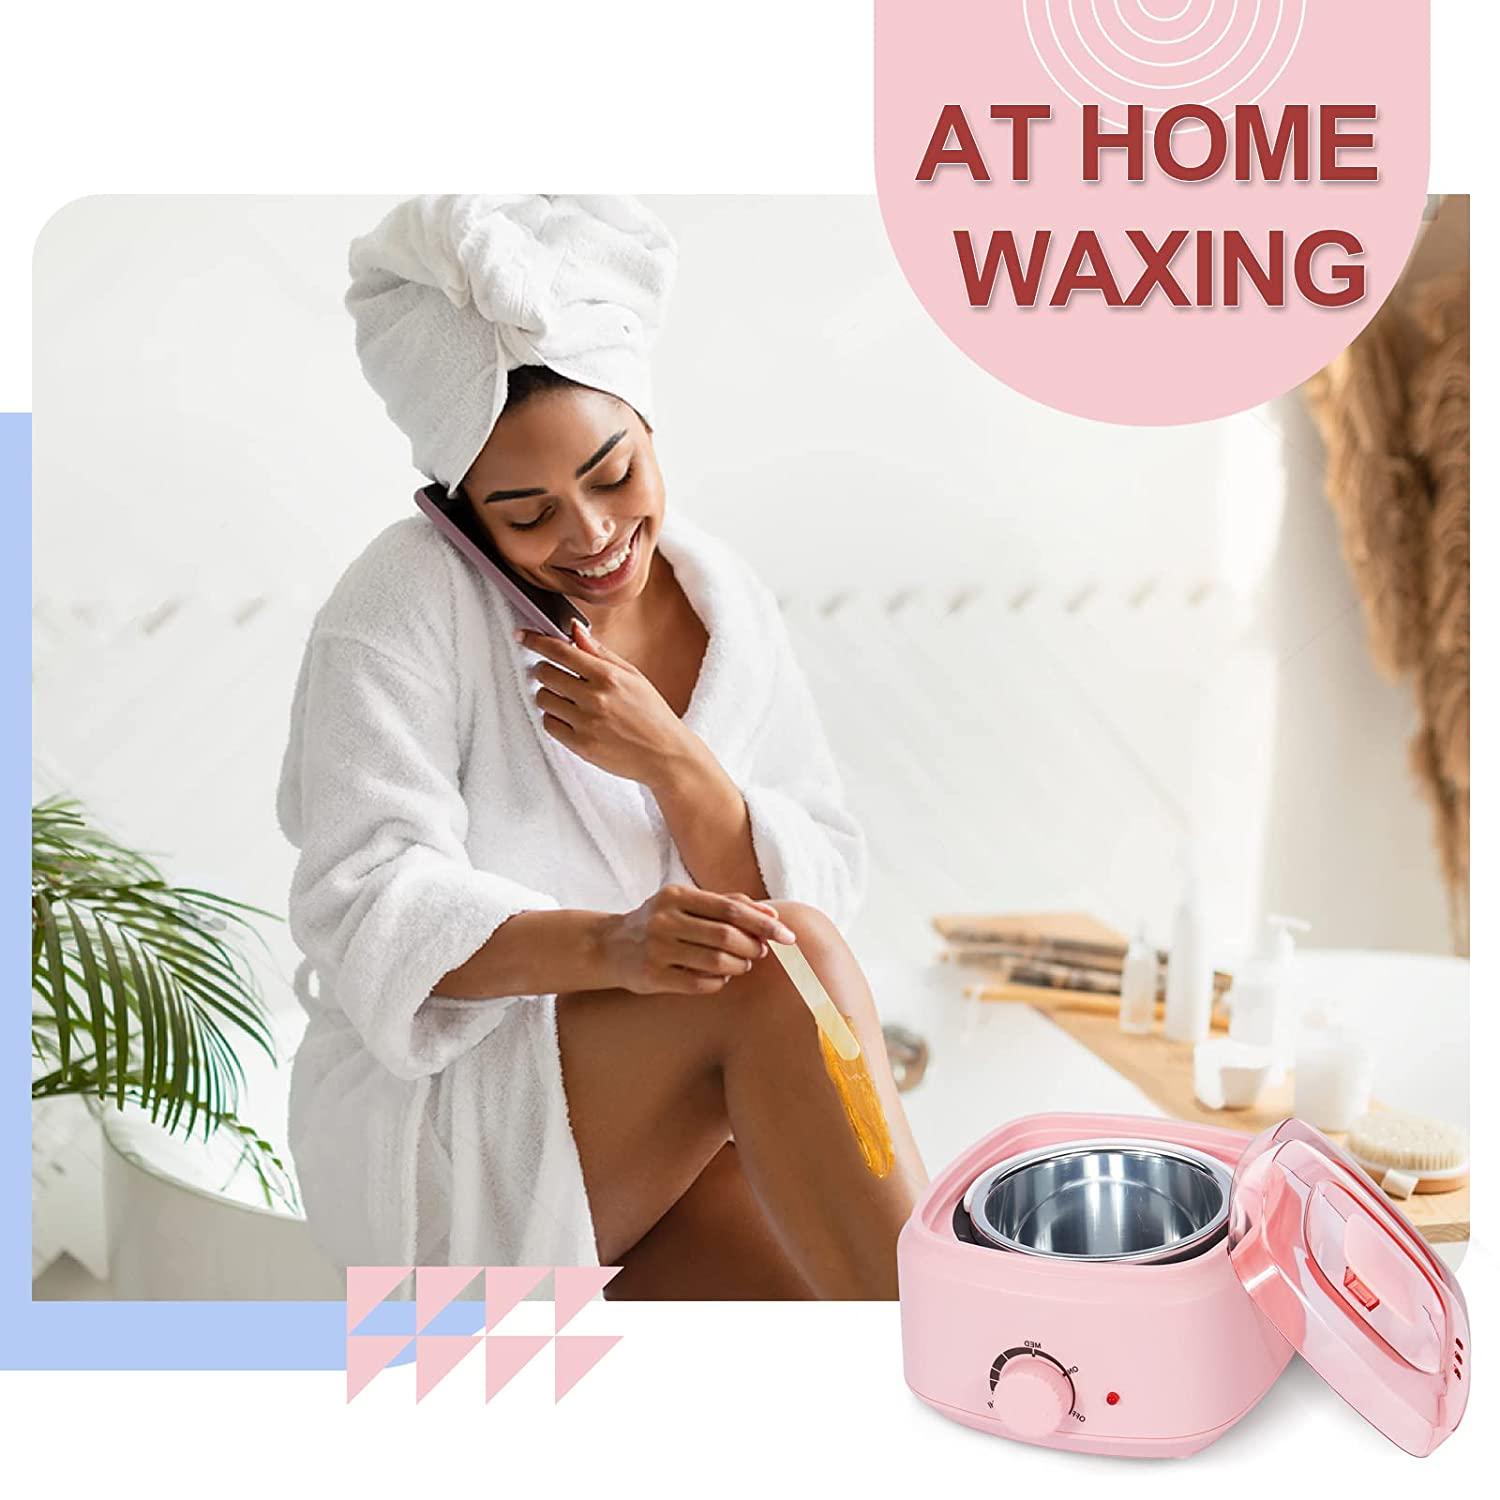 Happy Waxing Kit - Buy the unique waxing kit at home